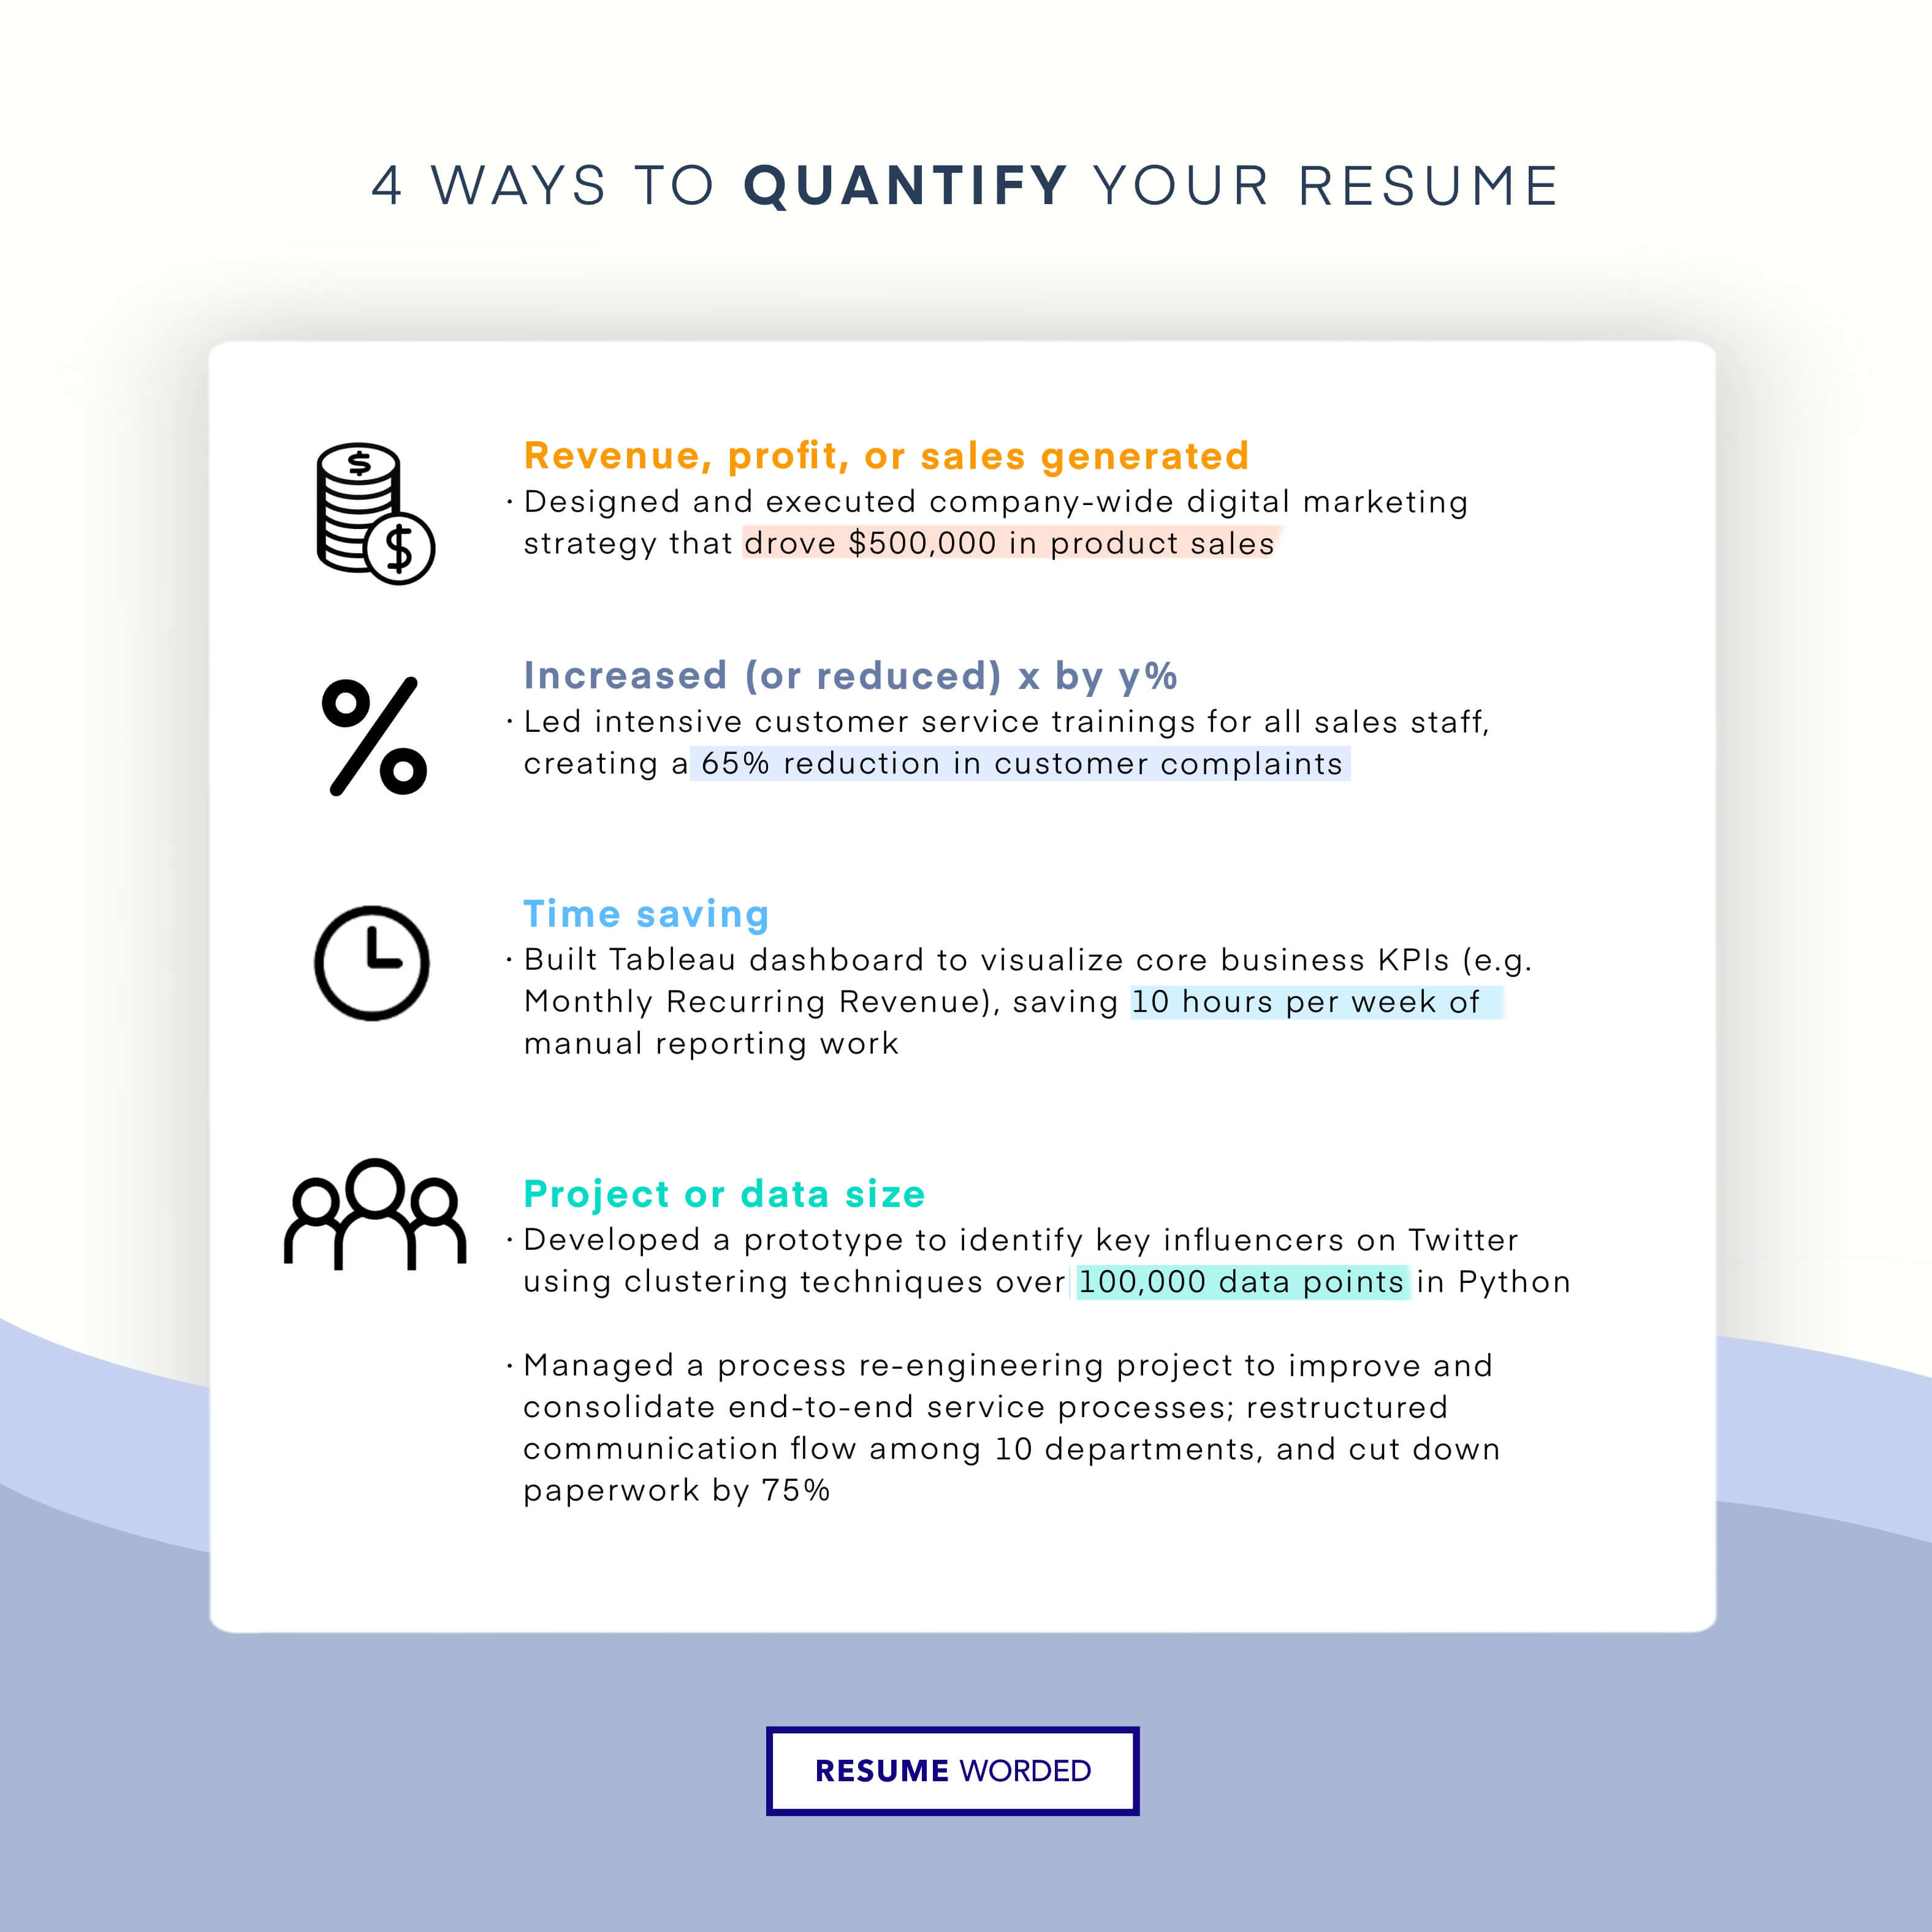 Use metrics to show you value addition. - Software QA Engineer Resume